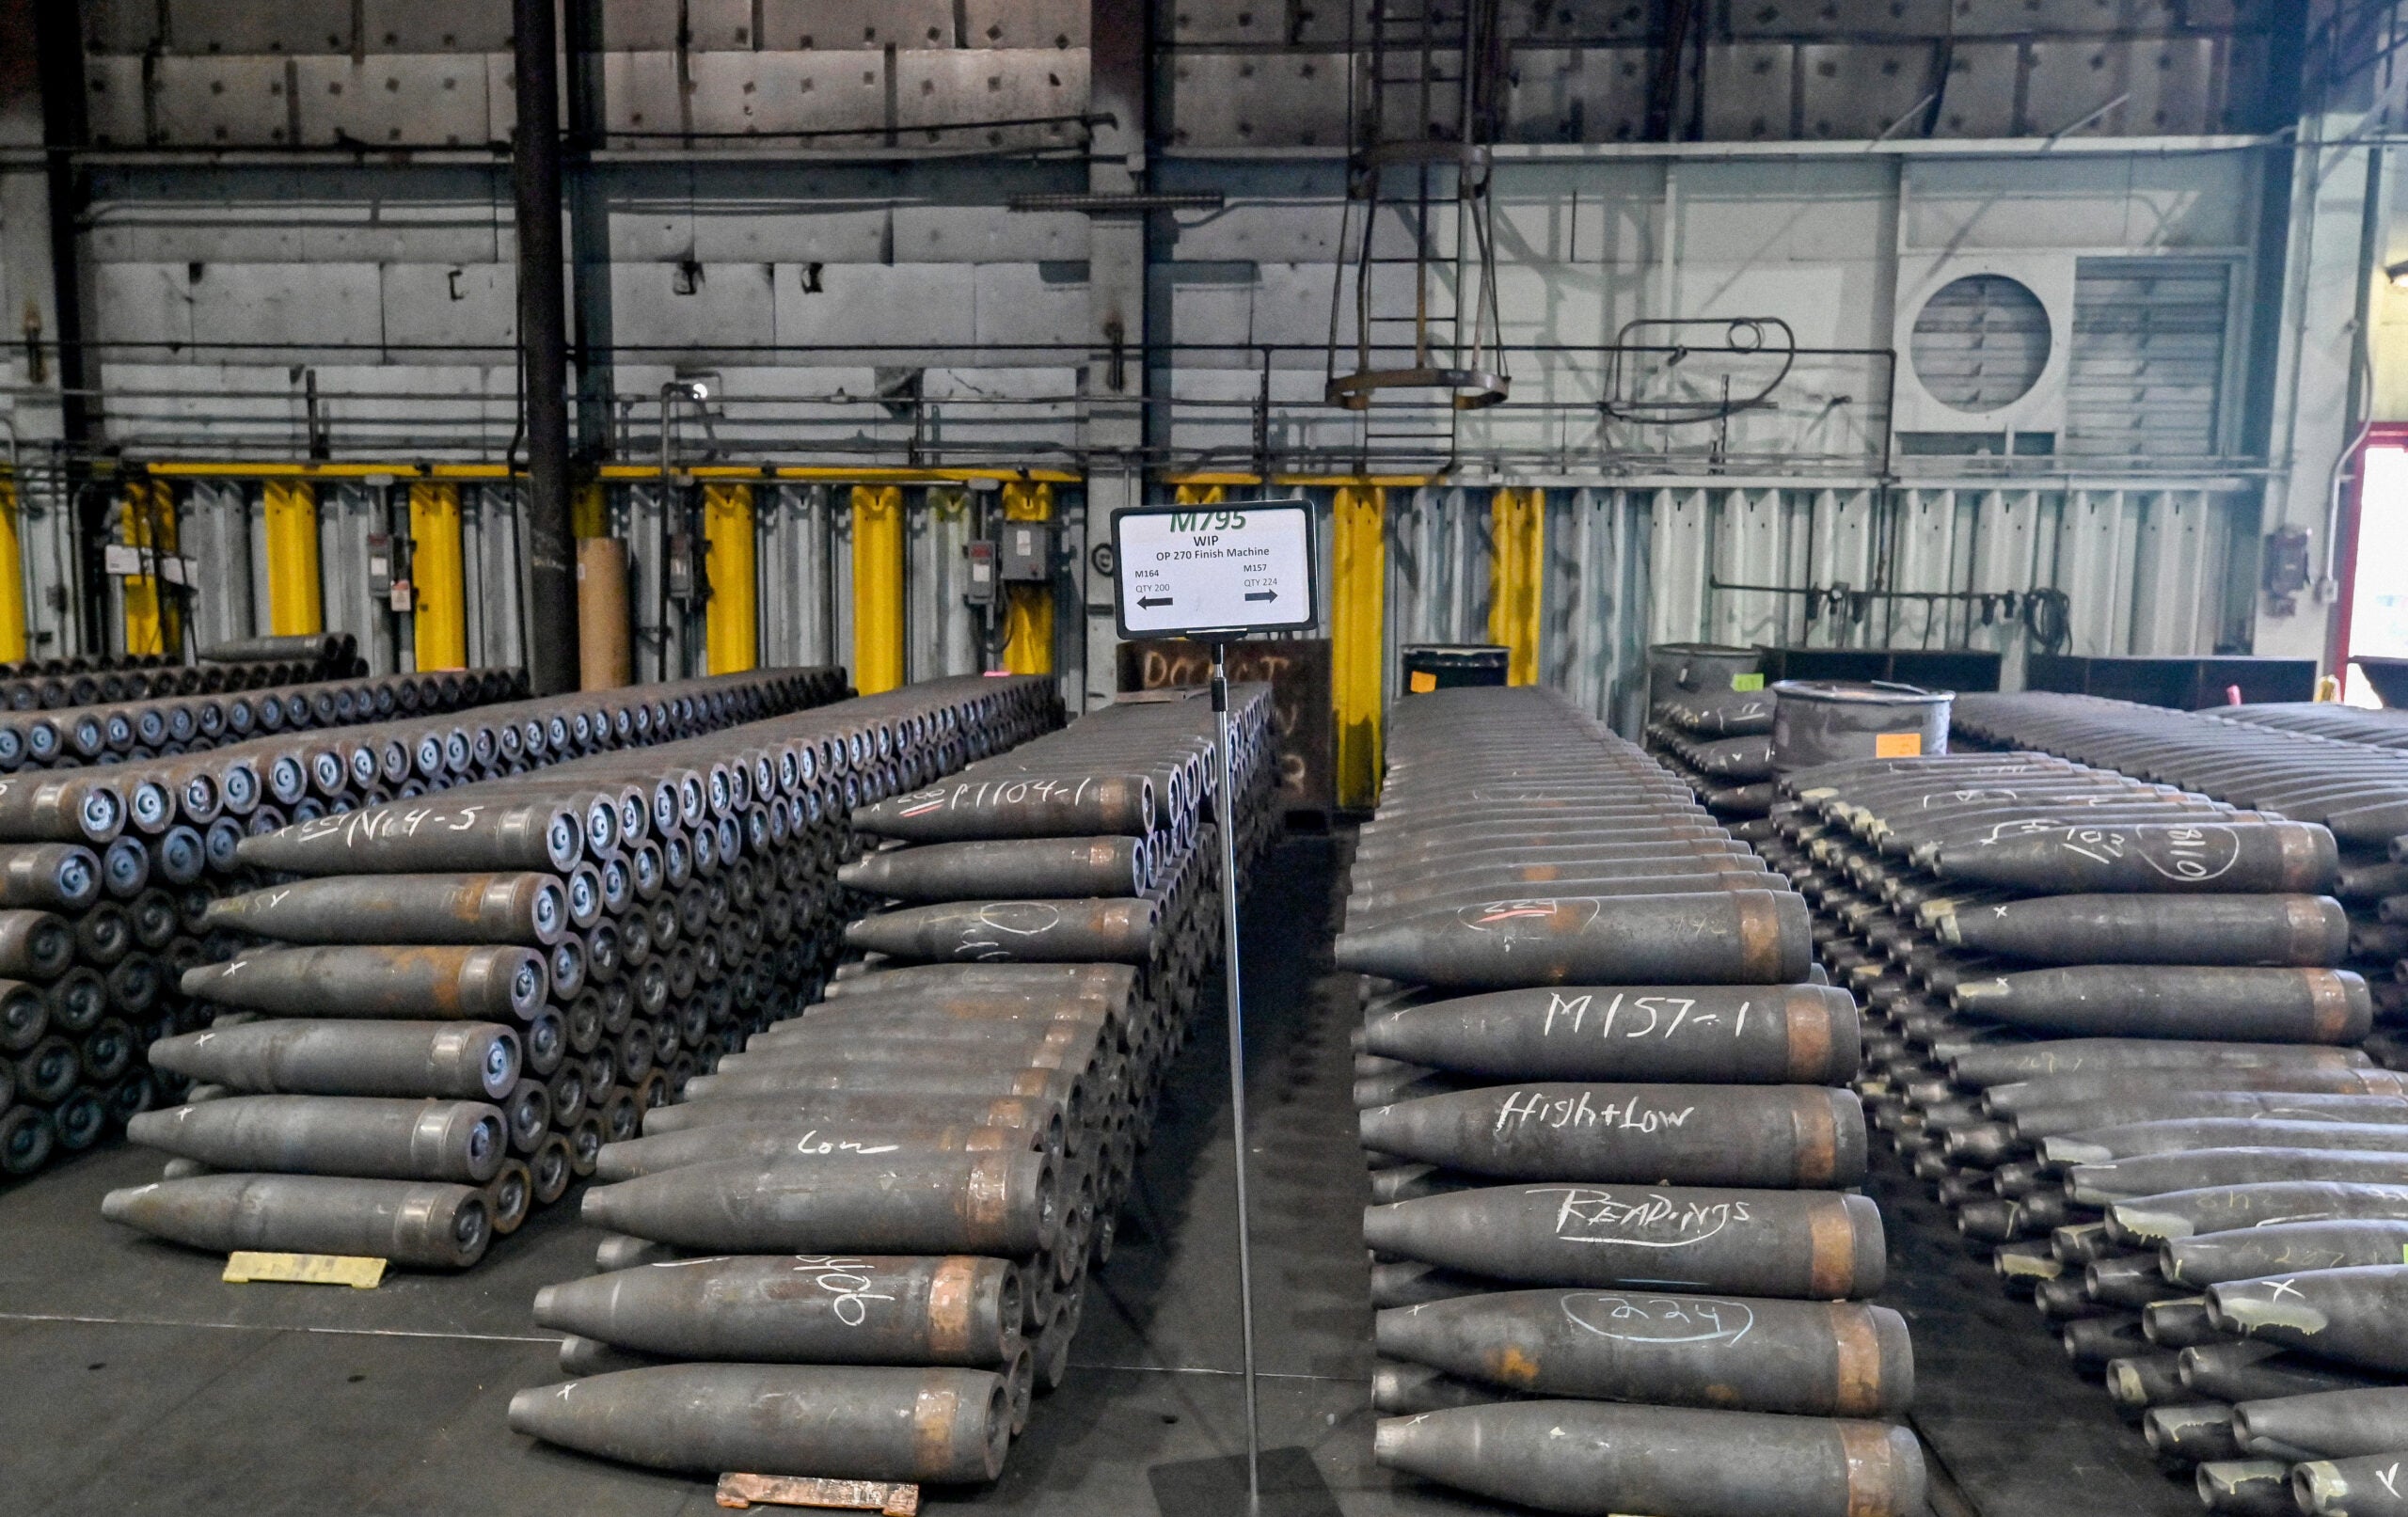 SCRANTON, PENNSYLVANIA, UNITED STATES - 2023/04/12: Rows of incomplete shells wait for the next step in production. The Scranton Army Ammunition Plant held a media day to show what they make. The plant makes a 155mm artillery shell. (Photo by Aimee Dilger/SOPA Images/LightRocket via Getty Images)